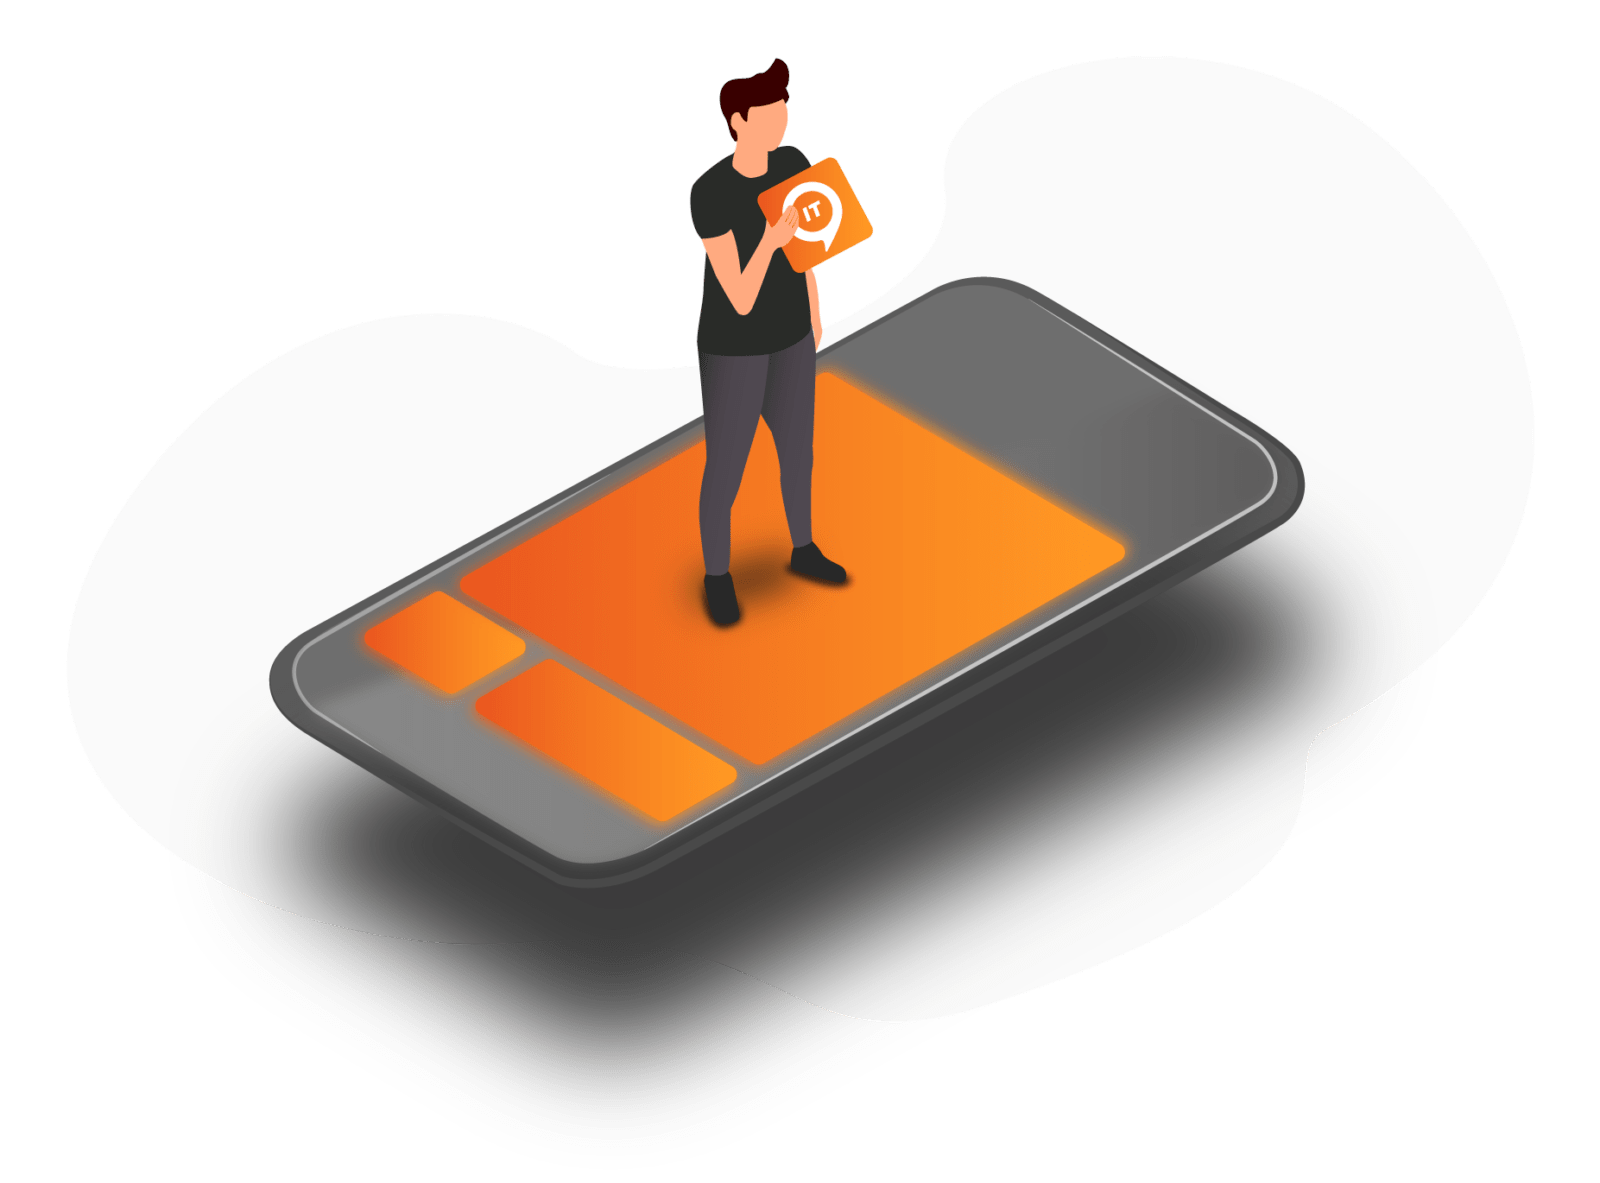 Graphical illustration of a smartphone with three orange boxes on it. A man is standing on top of the phone holding an orange square with Iterator IT's logo, without text.